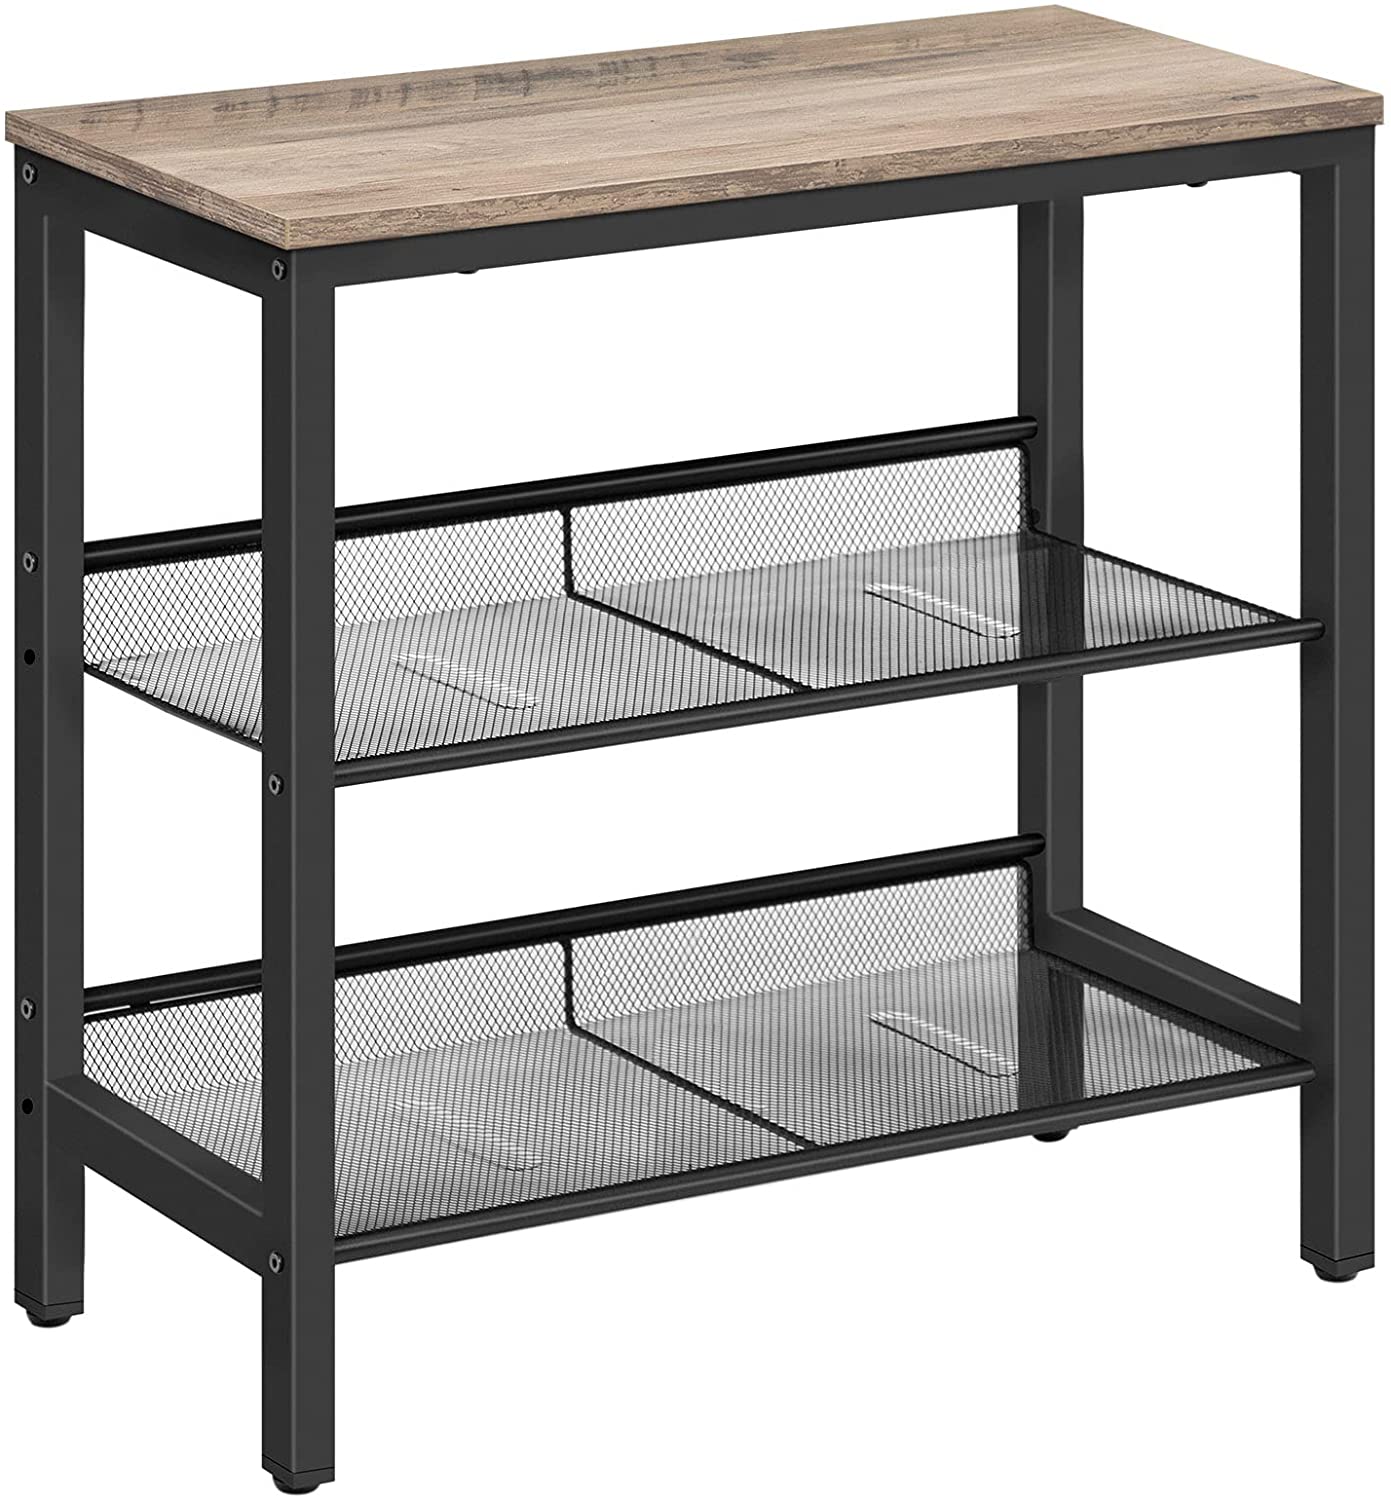 Side Tables 2 Flat or Slant Adjustable Shelves for Small Spaces, Hallway, Living Room, Bedroom, Sturdy, Easy Assembly, Greige and Black